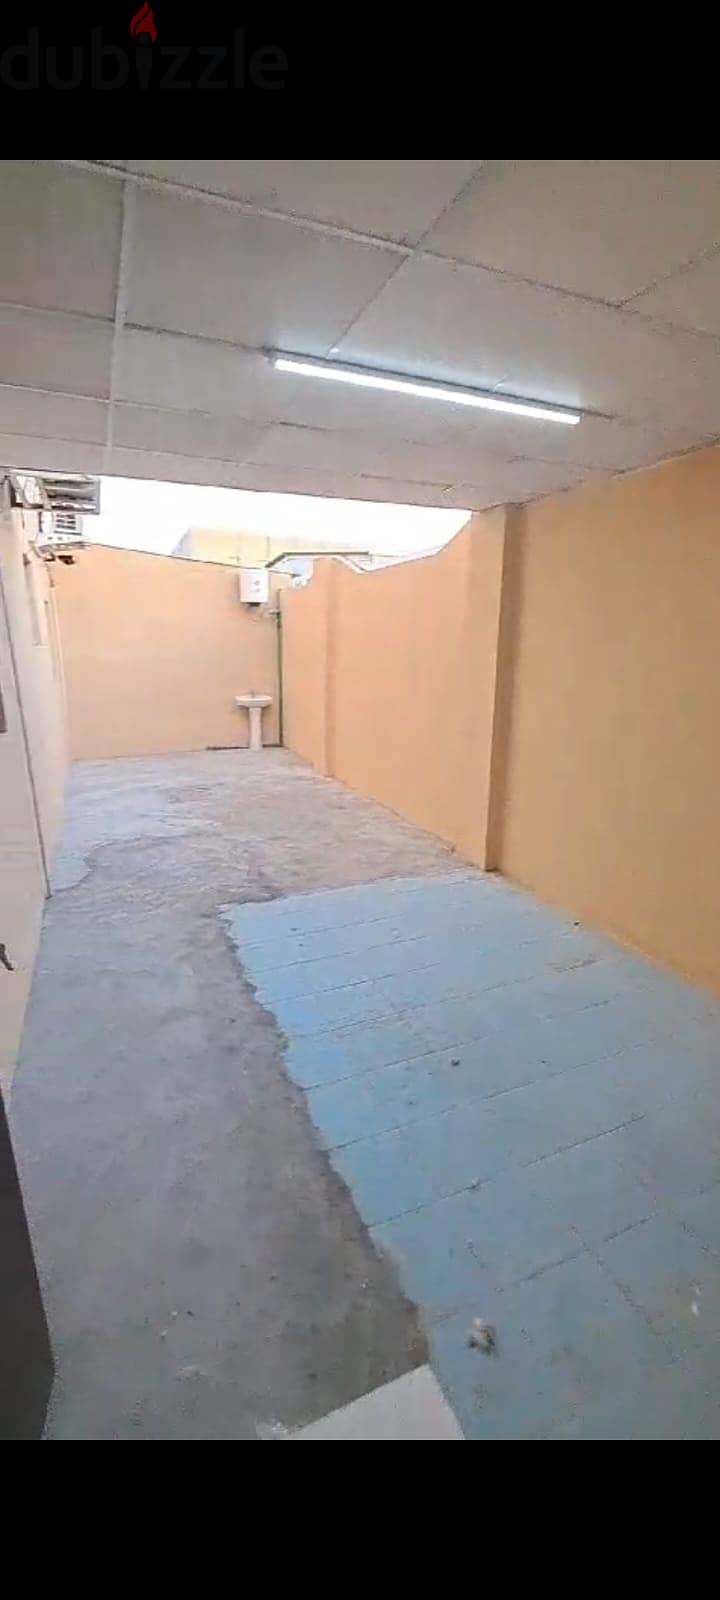 For rent flat (Ground floor apartment) in compound in Al Nasr 3bhk 13